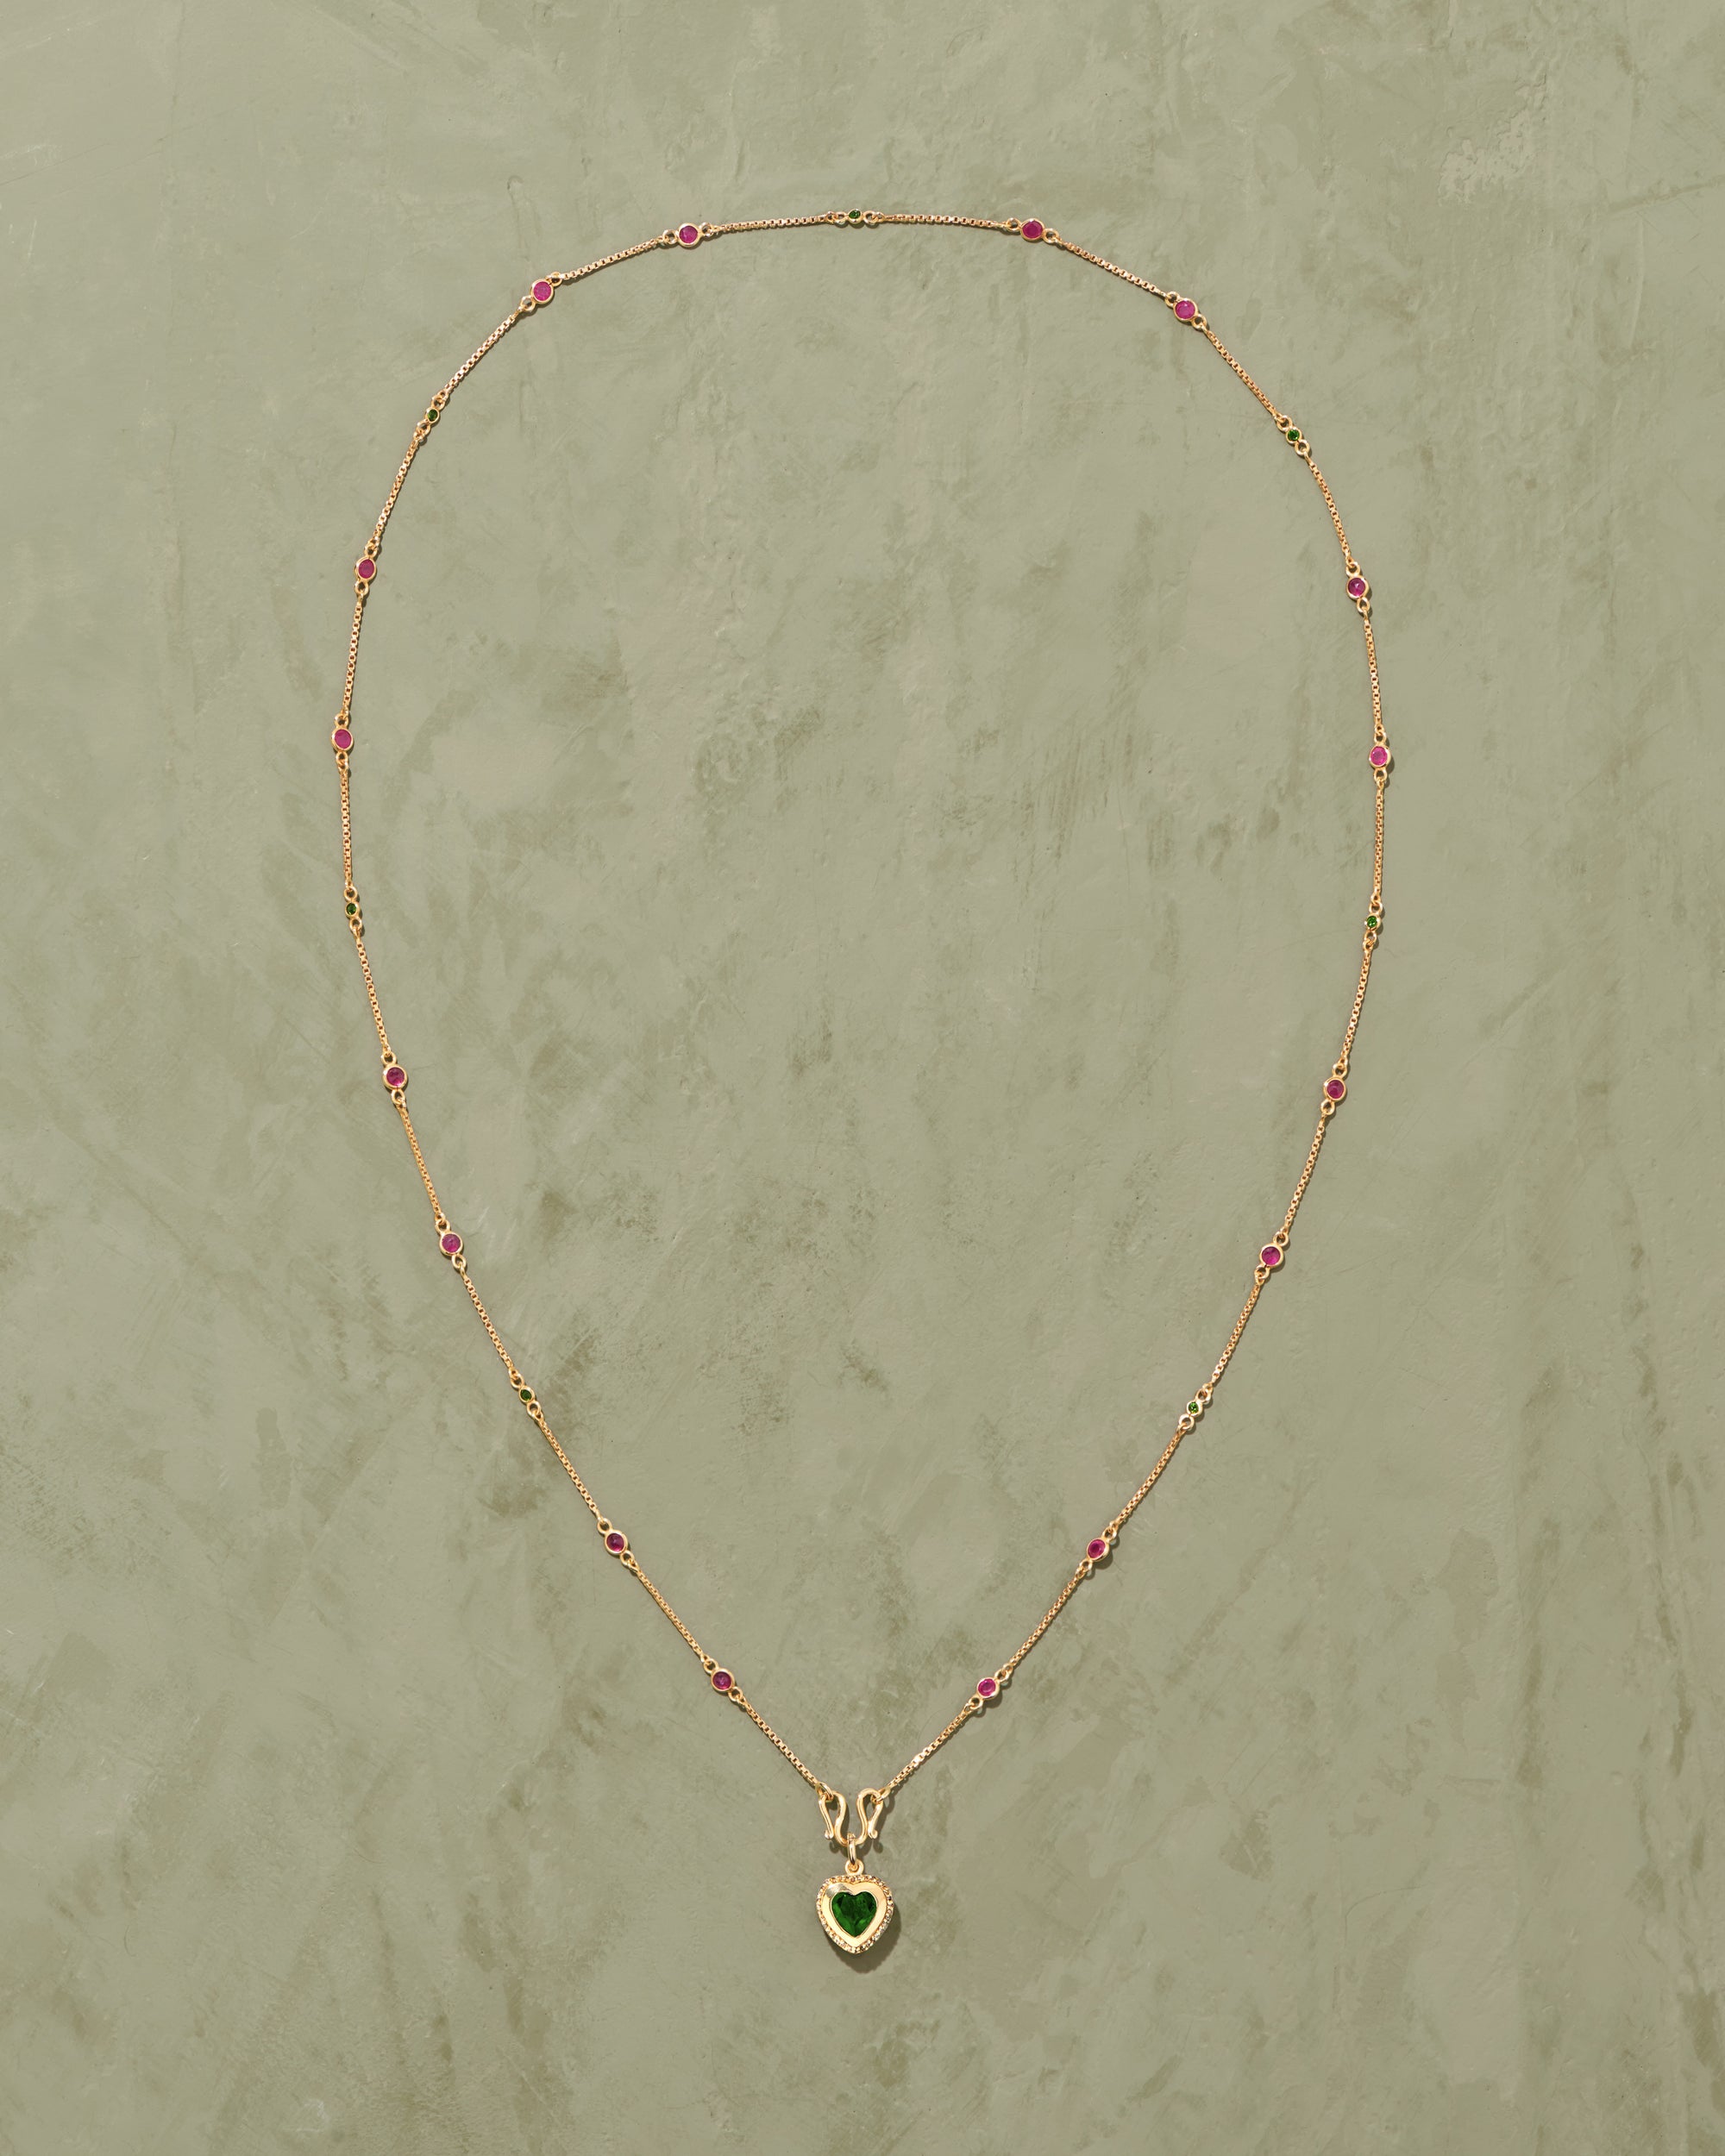 Gini diopside necklace